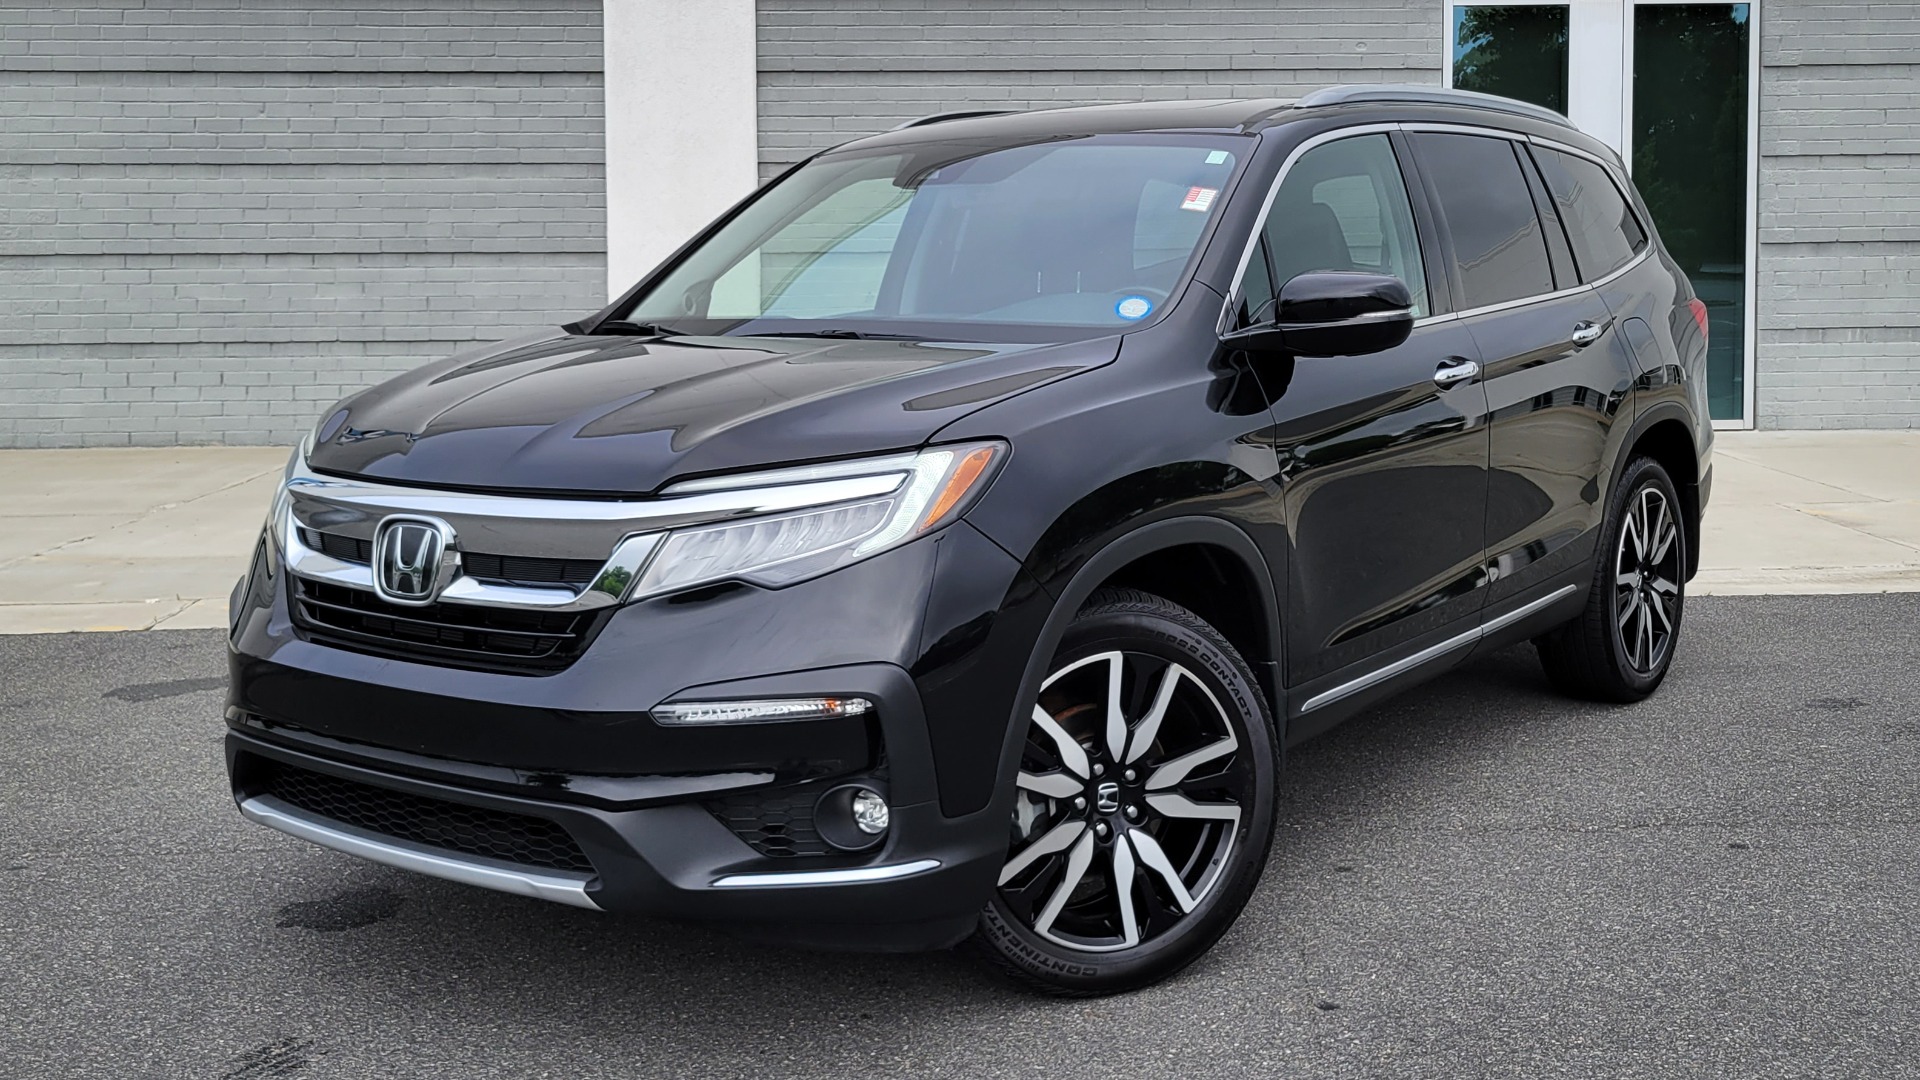 Used 2020 Honda PILOT TOURING 7-PASSENGER / NAV / SUNROOF / ENTERTAINMENT / 3-ROW for sale Sold at Formula Imports in Charlotte NC 28227 6